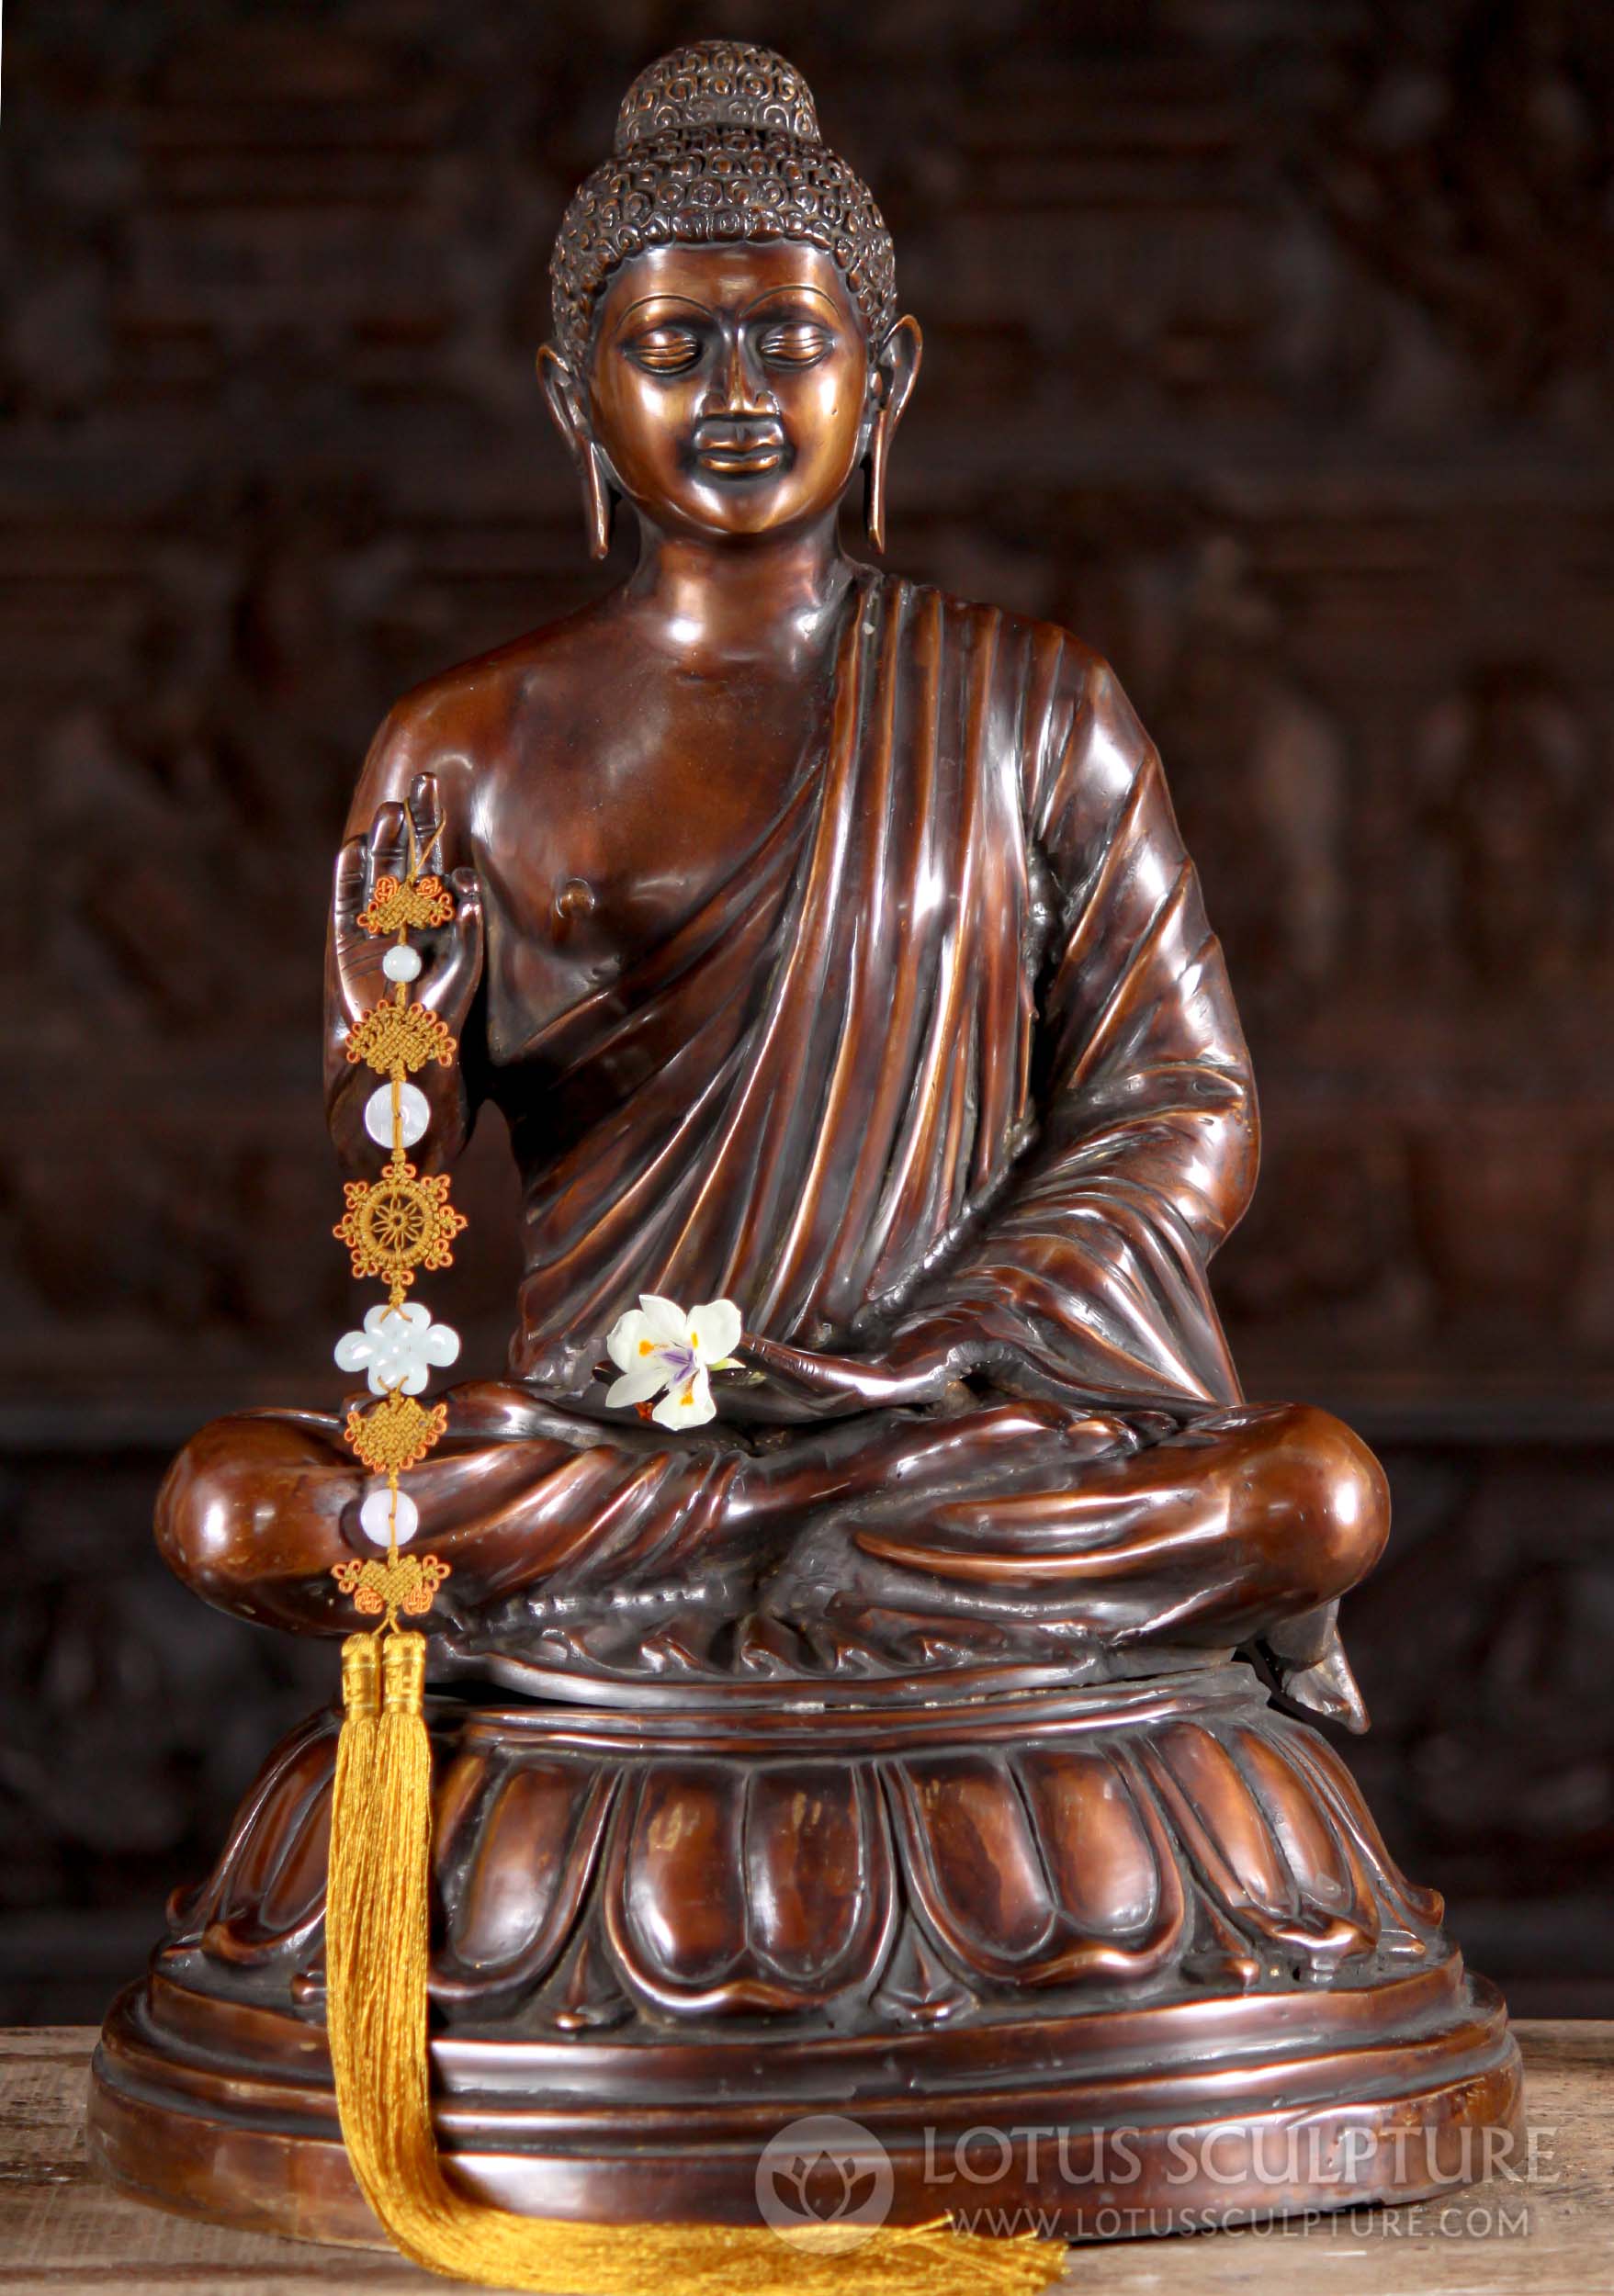 What Makes Buddha Statues A Unique Gift To So Many People?